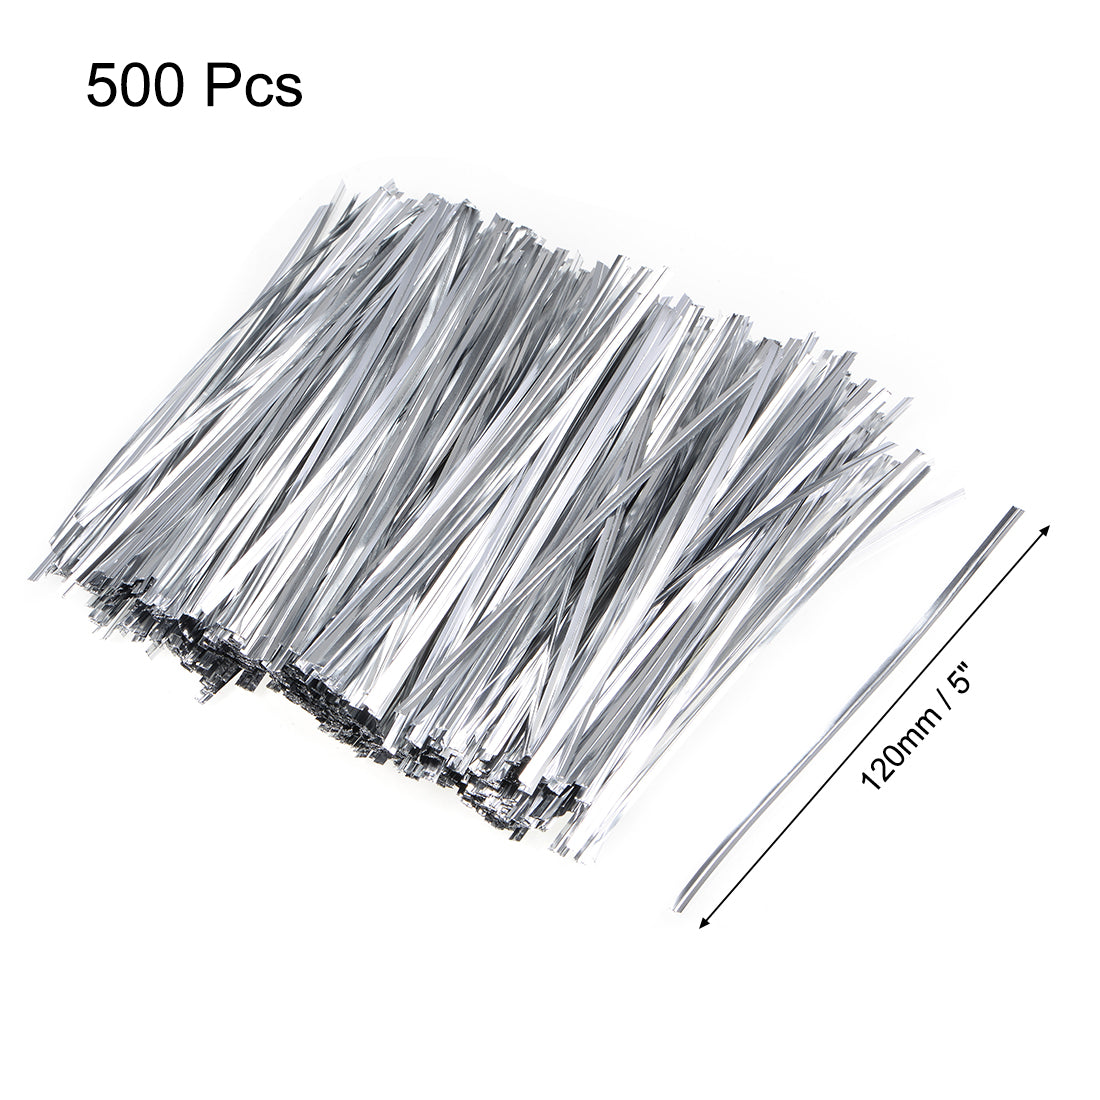 uxcell Uxcell Long Strong Twist Ties 4.7 Inches Quality Plastic Closure Tie for Tying Gift Bags Art Craft Ties Manage Cords Silvery 500pcs